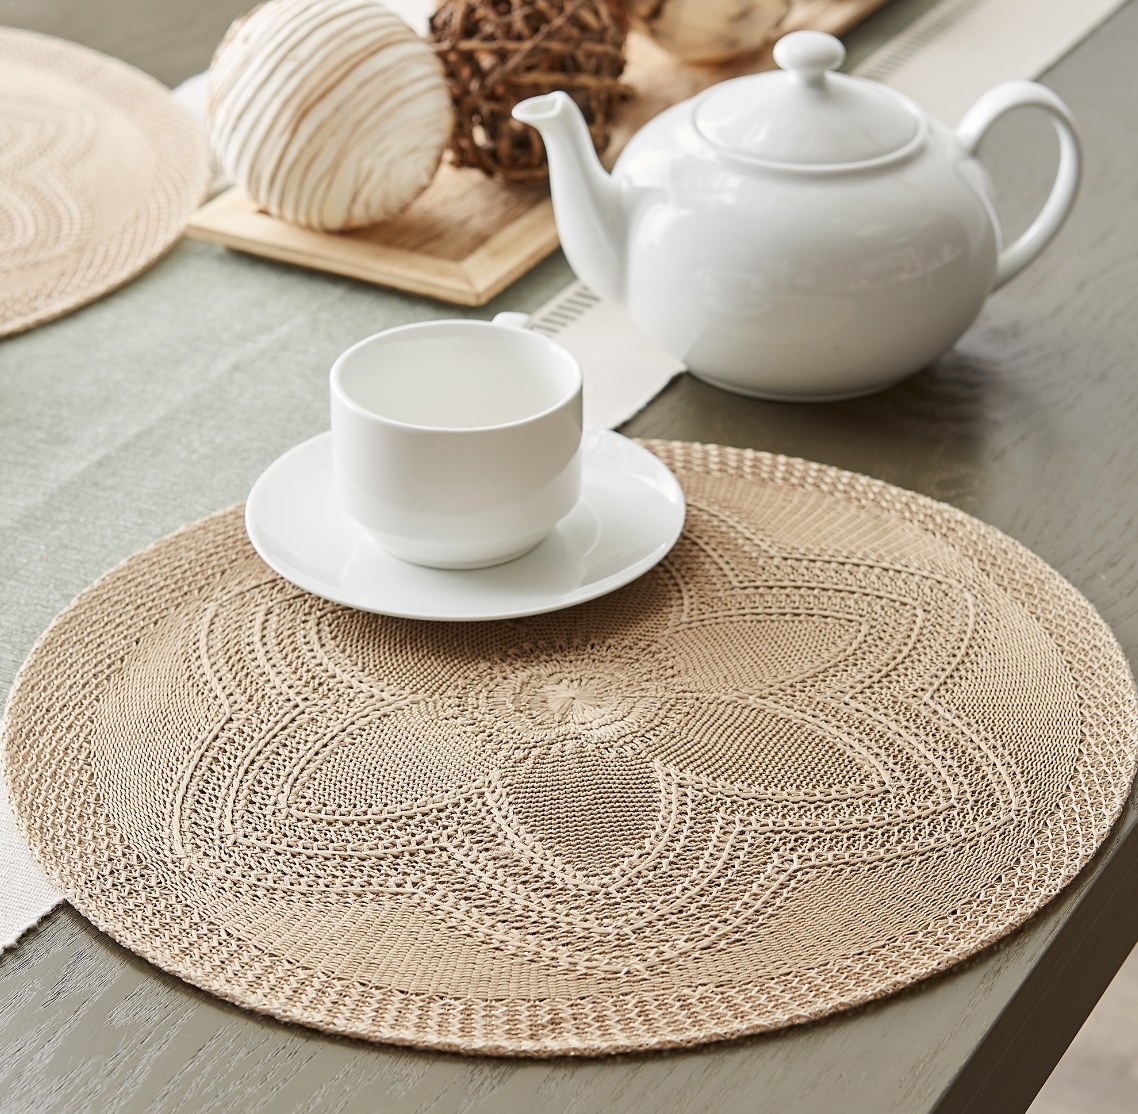 The tan floral stitch placemat is on a wooden table and surrounded by white porcelain decor